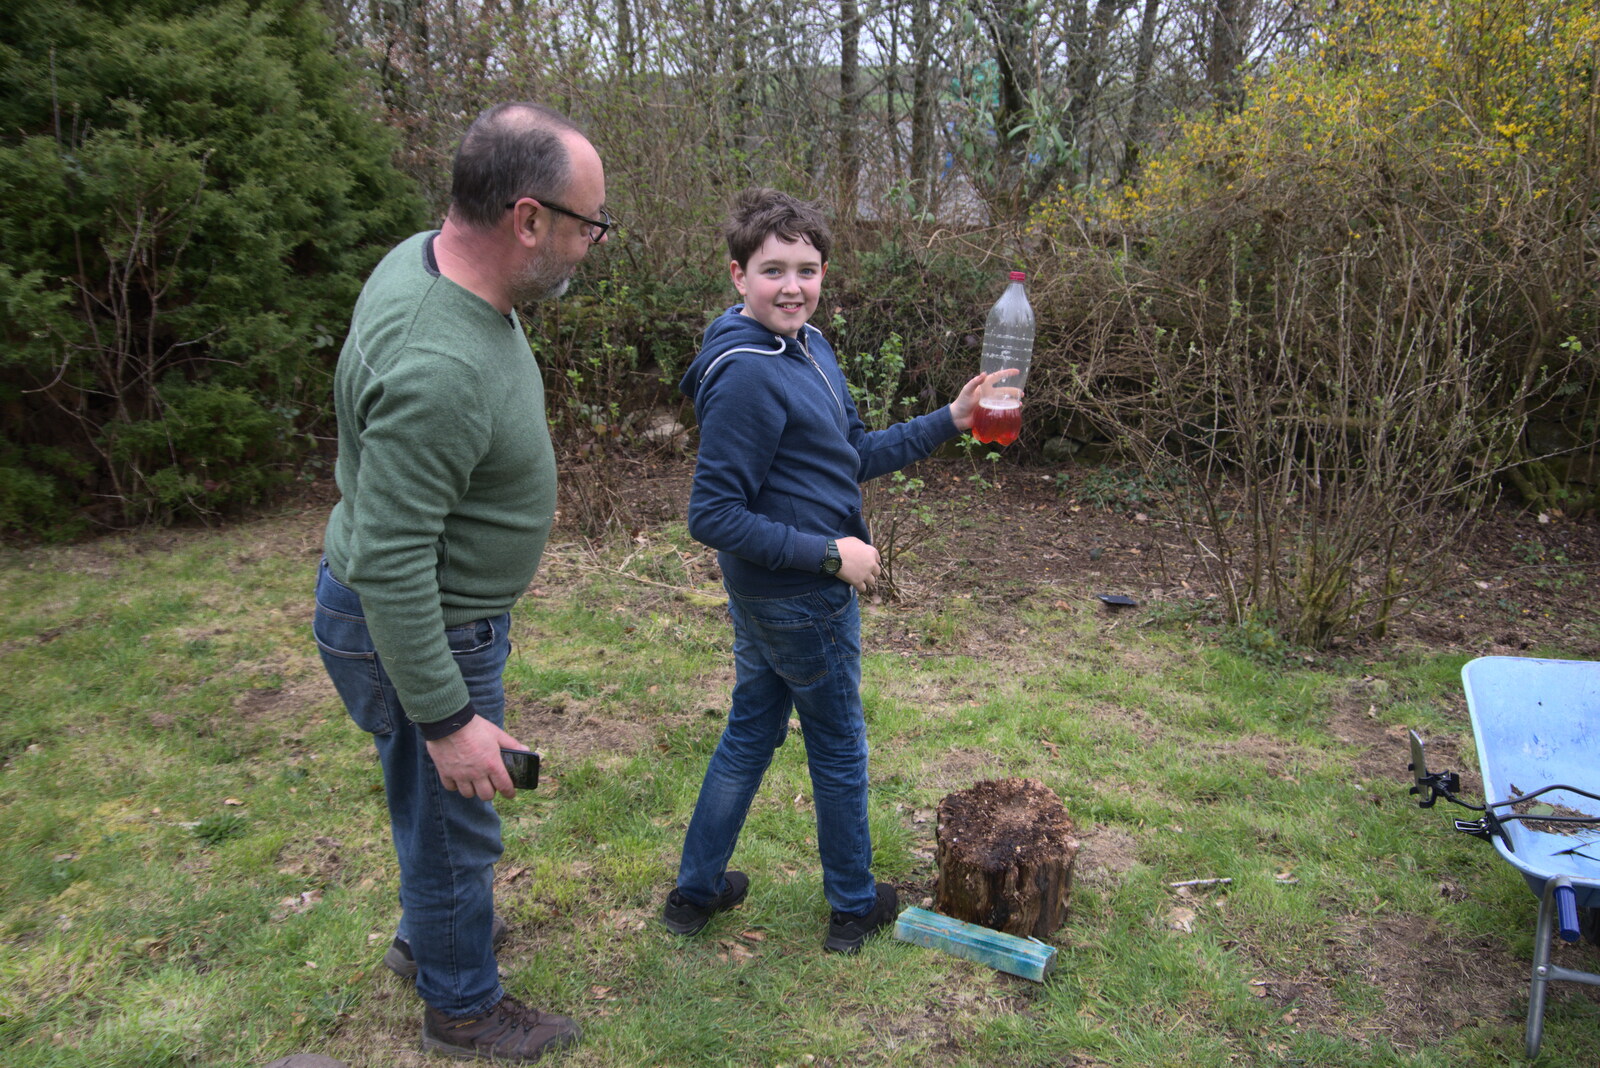 Fred shows off the leaking bottle target from Easter in South Zeal and Moretonhampstead, Devon - 9th April